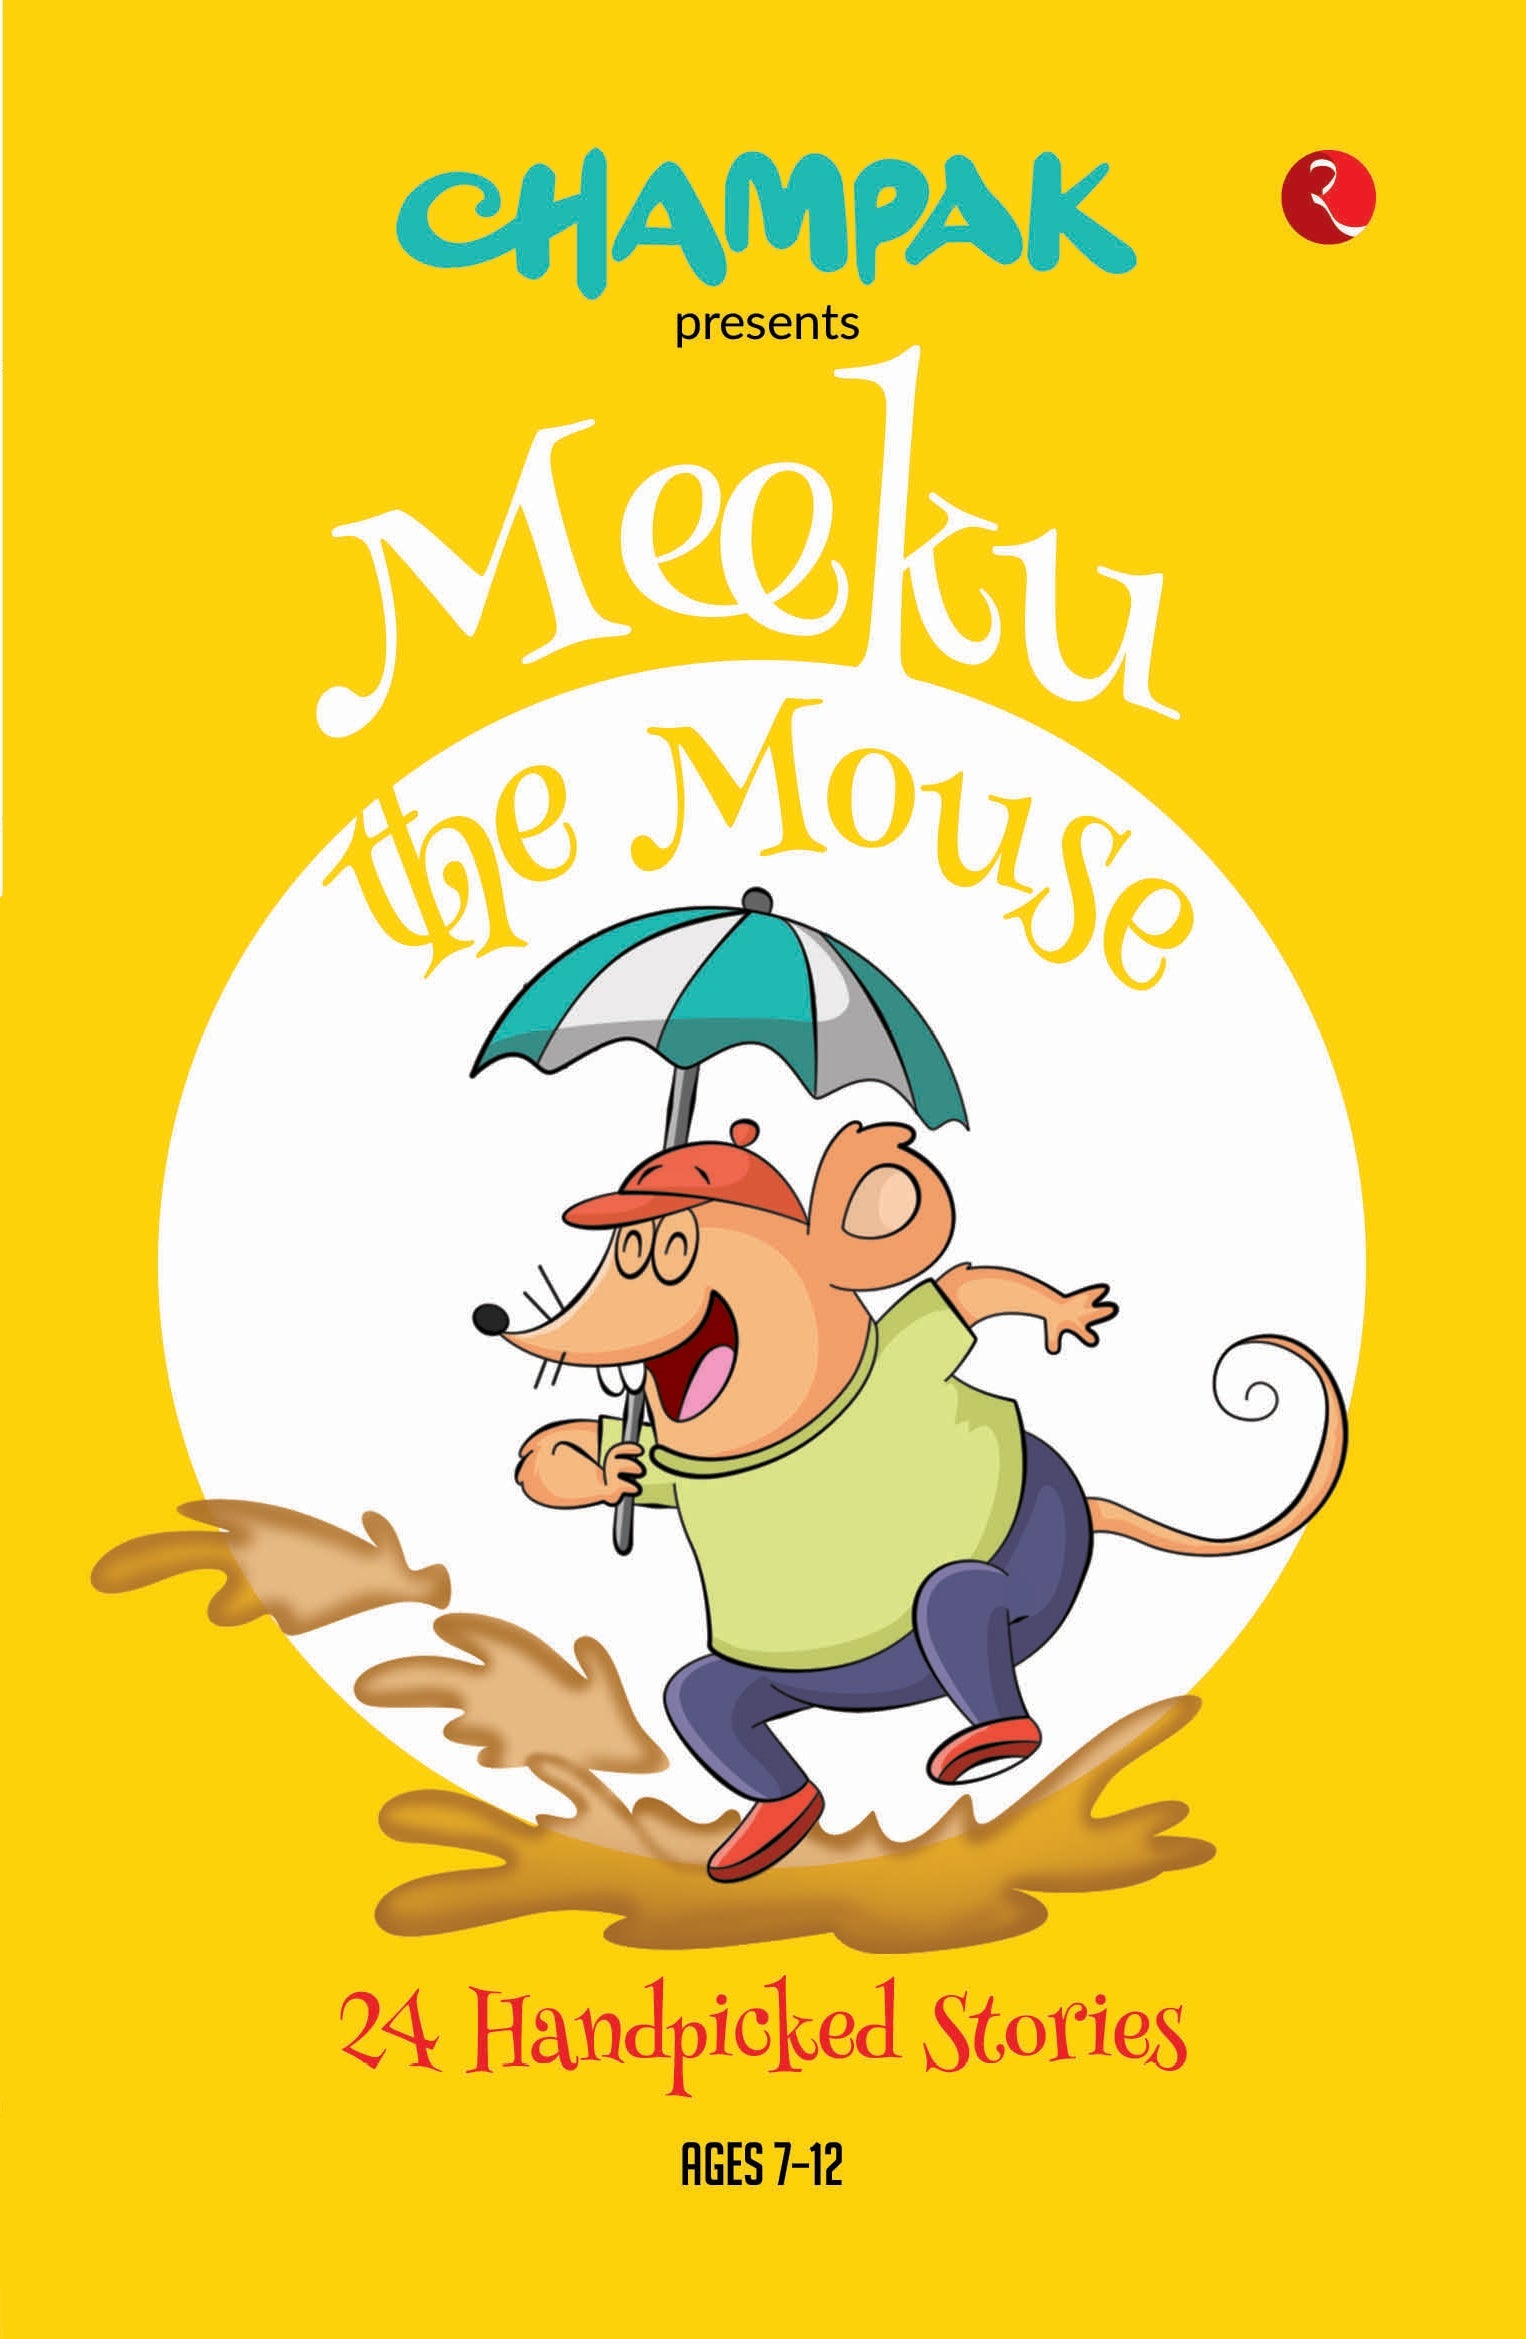 MEEKU THE MOUSE